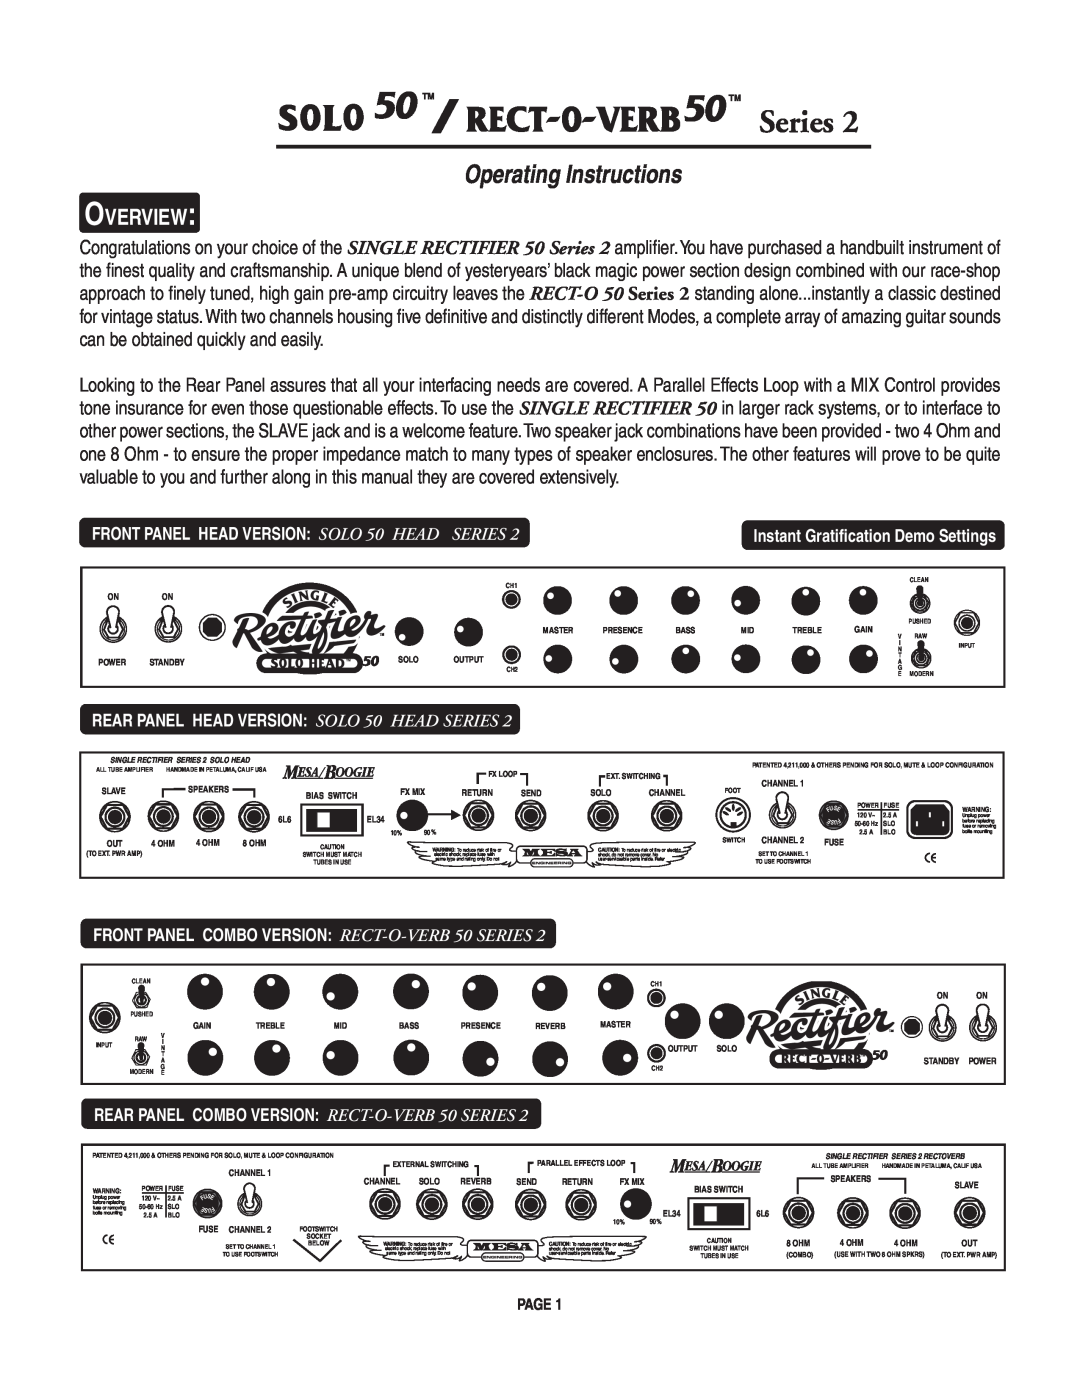 Mesa/Boogie pmn owner manual Overview, Series, Operating Instructions, REAR PANEL COMBO VERSION RECT-O-VERB50 SERIES 